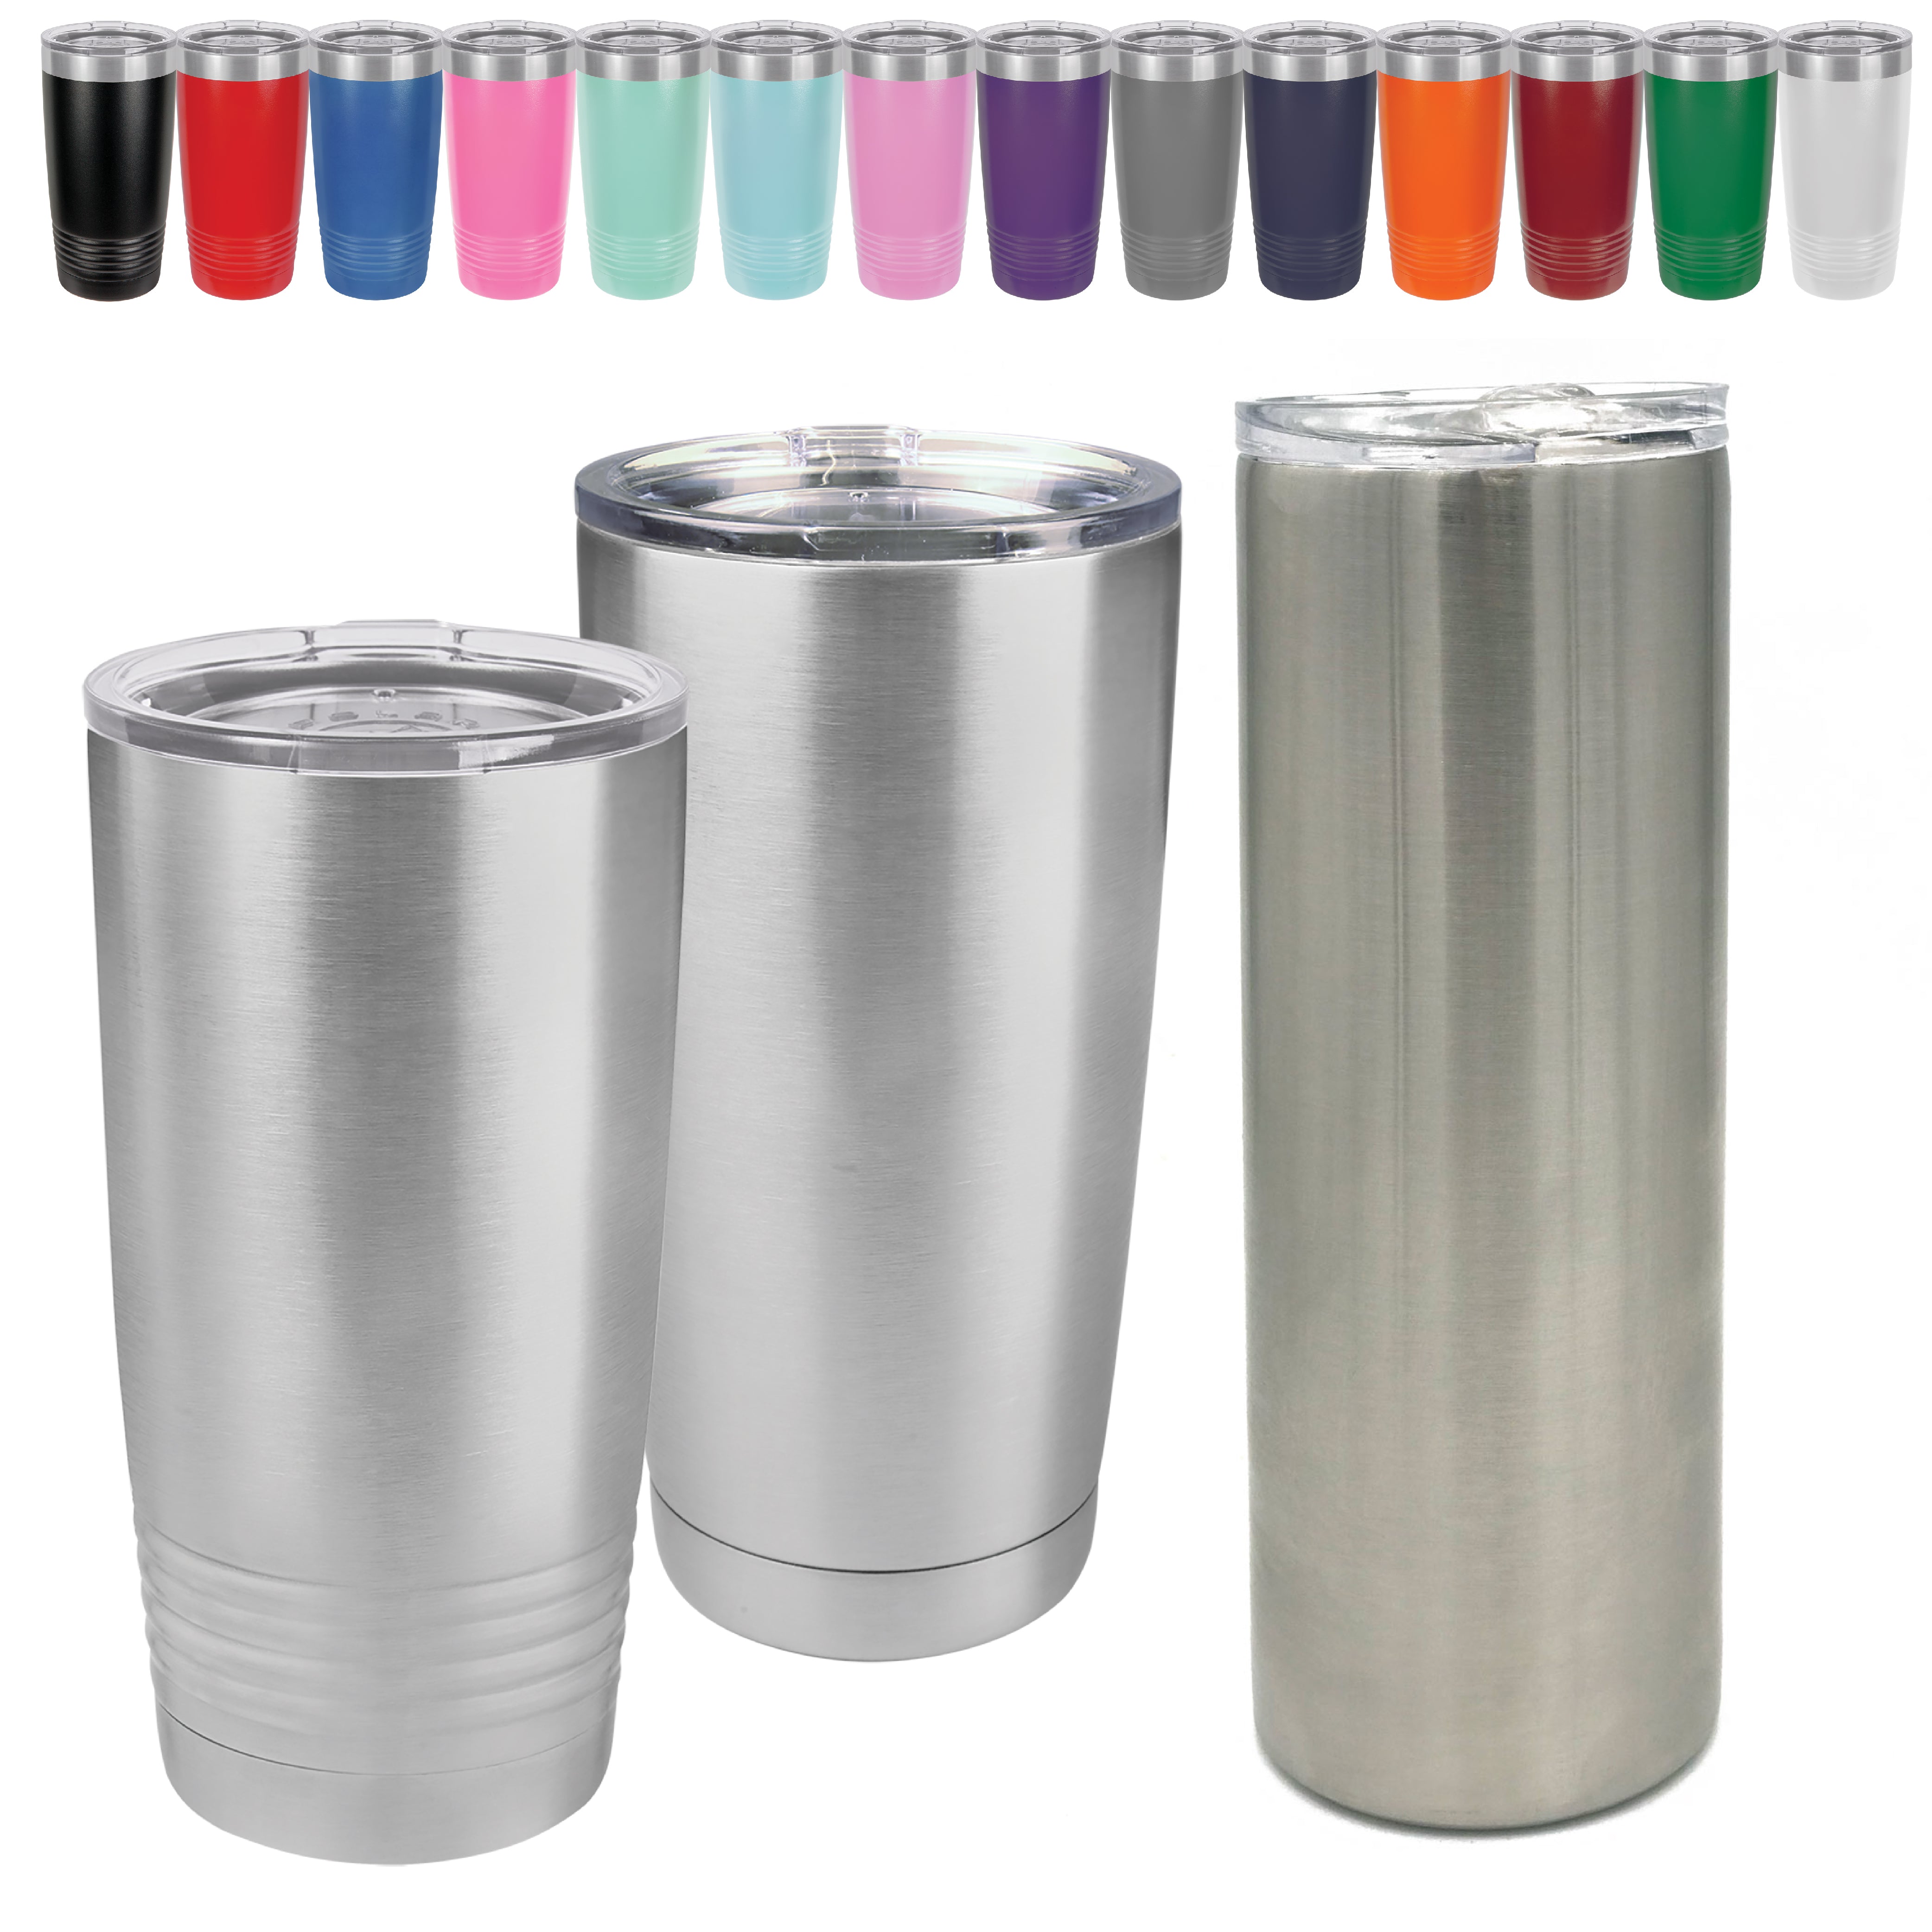 https://cdn.shopify.com/s/files/1/0019/3970/1807/collections/20-oz-Blank-Stainless-Steel-Tumblers-Insulated-Metal-Cups-and-Wine-Glasses.jpg?v=1549145983